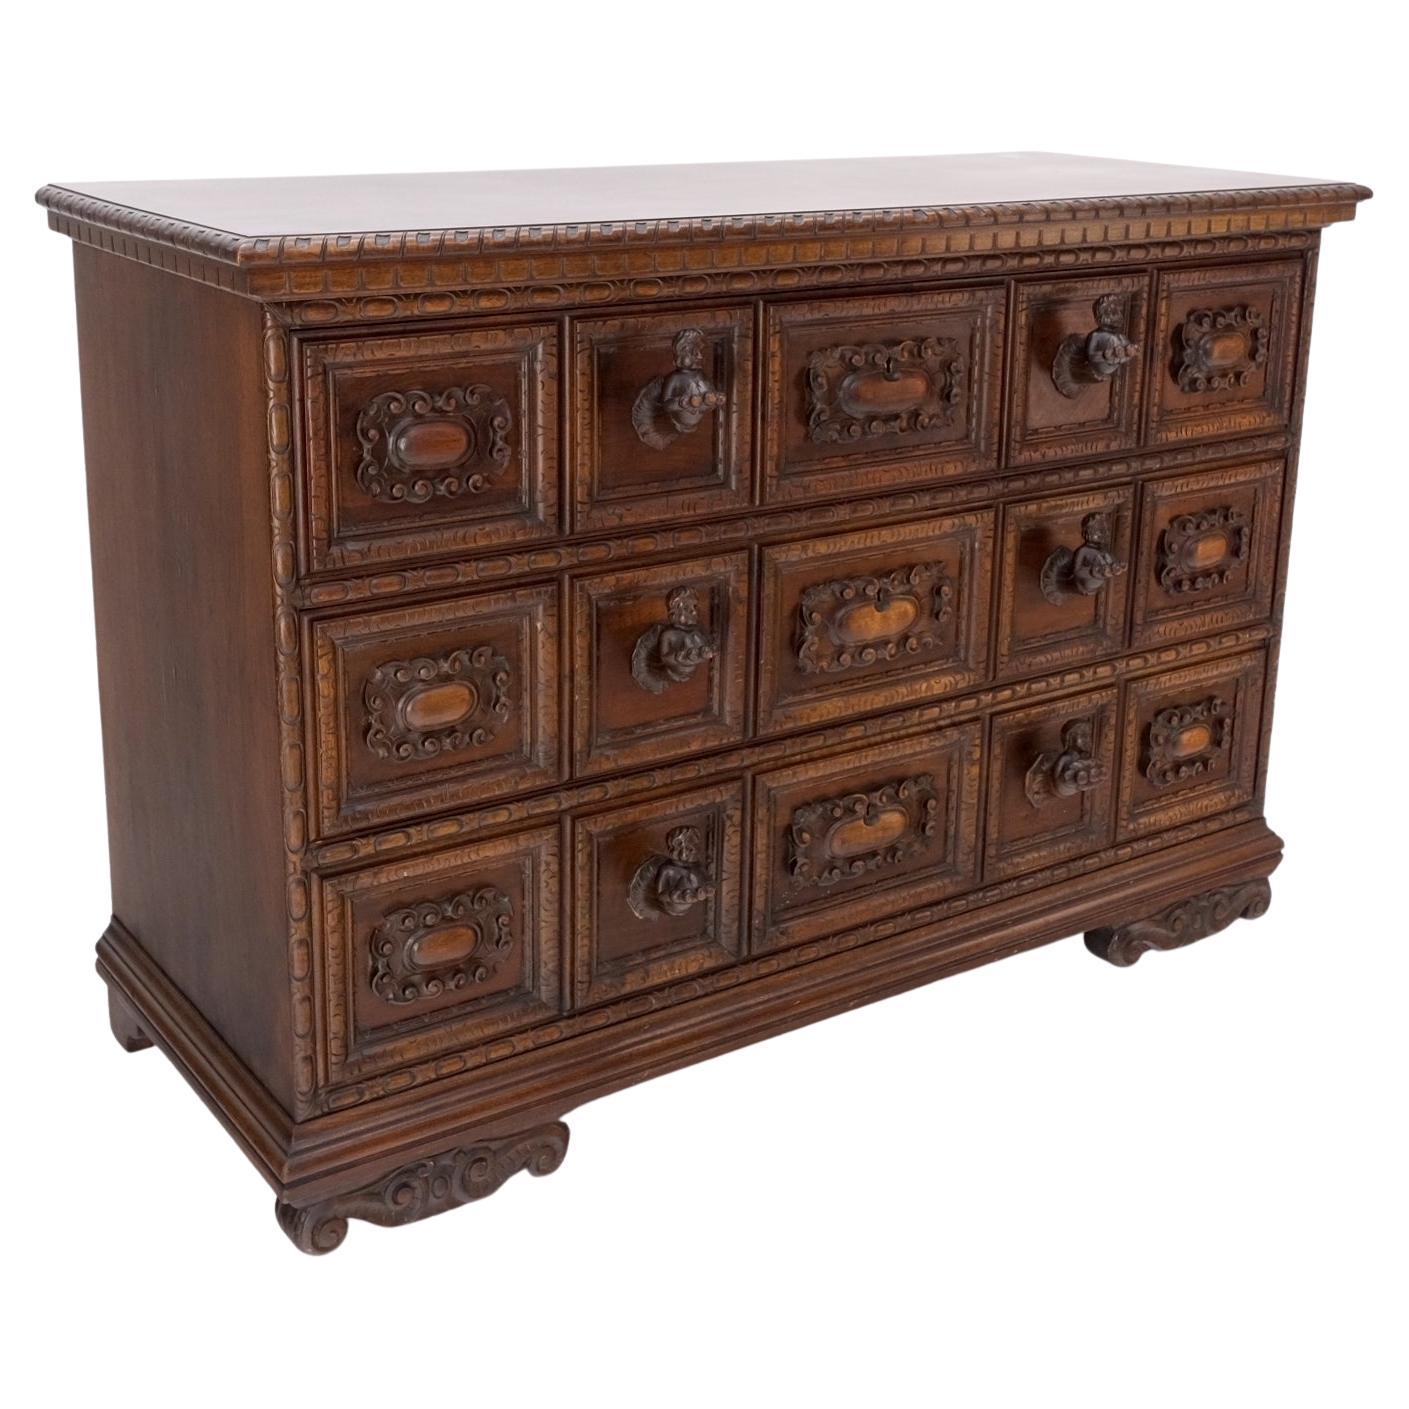 Jacobean Fusion 3 Dovetail drawers Heavily Carved Wooden Pulls Rope Edge Bachelor Chest Dresser.
 Unusual custom antique cabinet of superior quality.